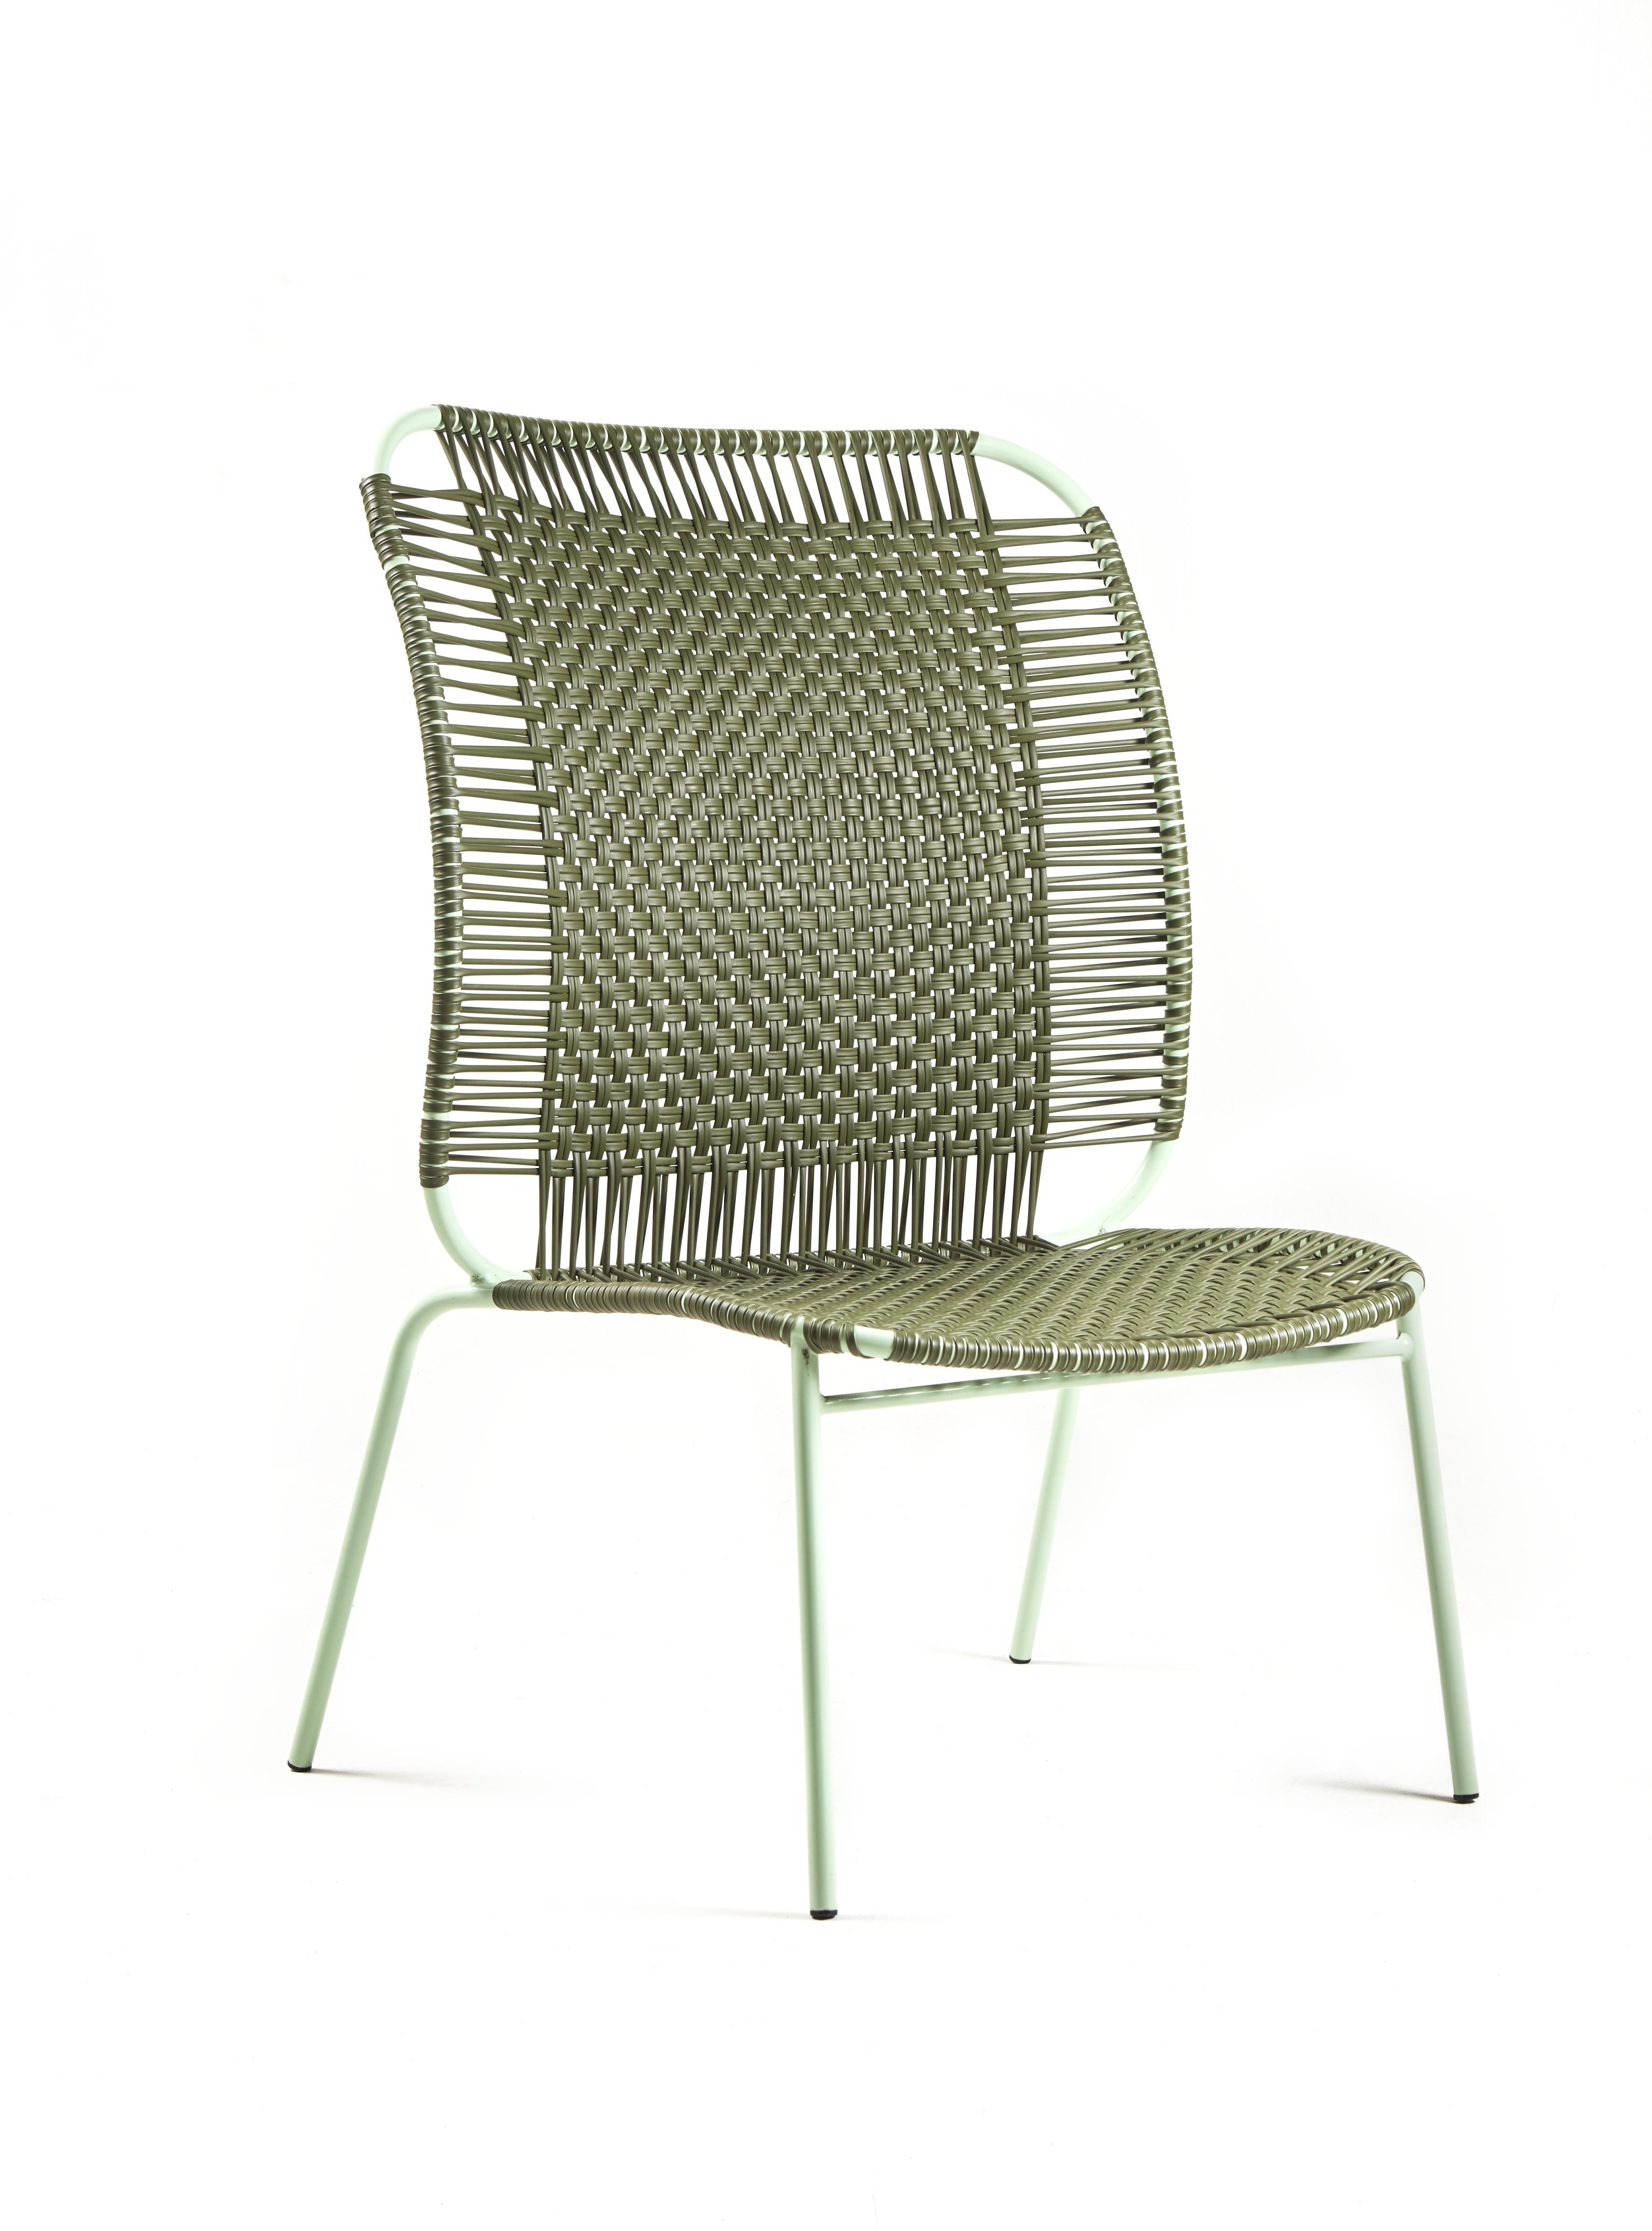 Olive Cielo lounge high chair by Sebastian Herkner
Materials: Galvanized and powder-coated tubular steel. PVC strings are made from recycled plastic.
Technique: Made from recycled plastic and weaved by local craftspeople in Cartagena, Colombia.